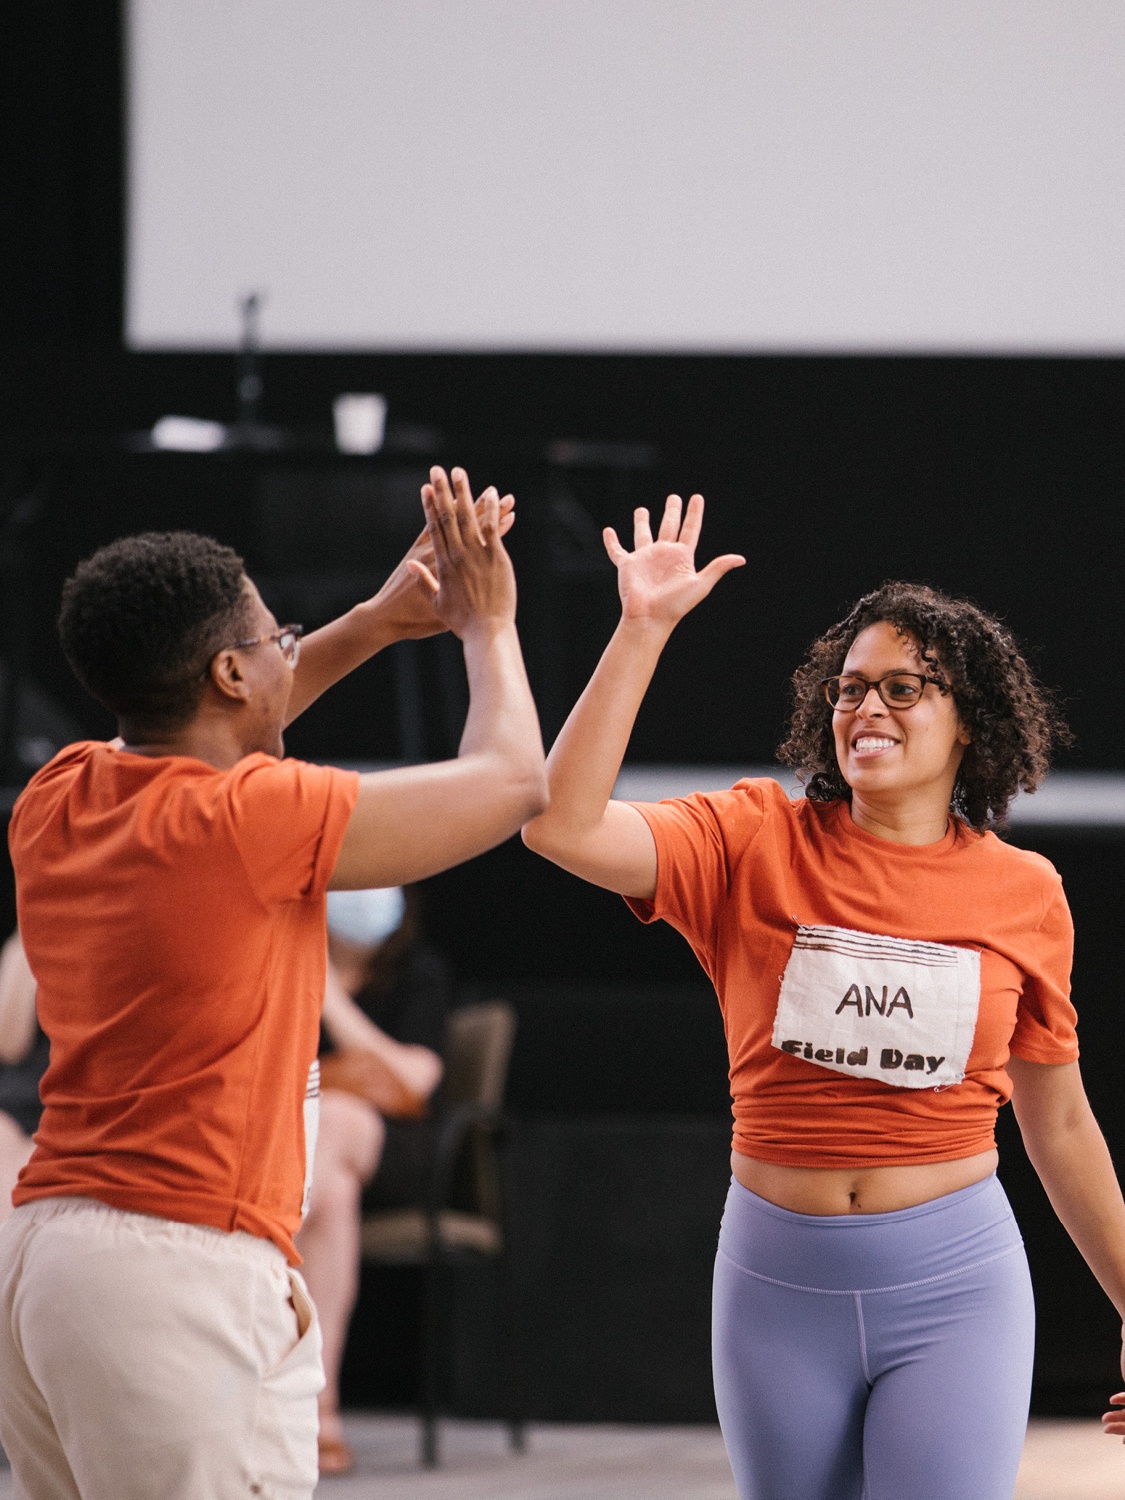 Two people in orange t-shirts lifting their hands to give a high five. The person facing the camera has a name tag across her chest that reads "Ana".